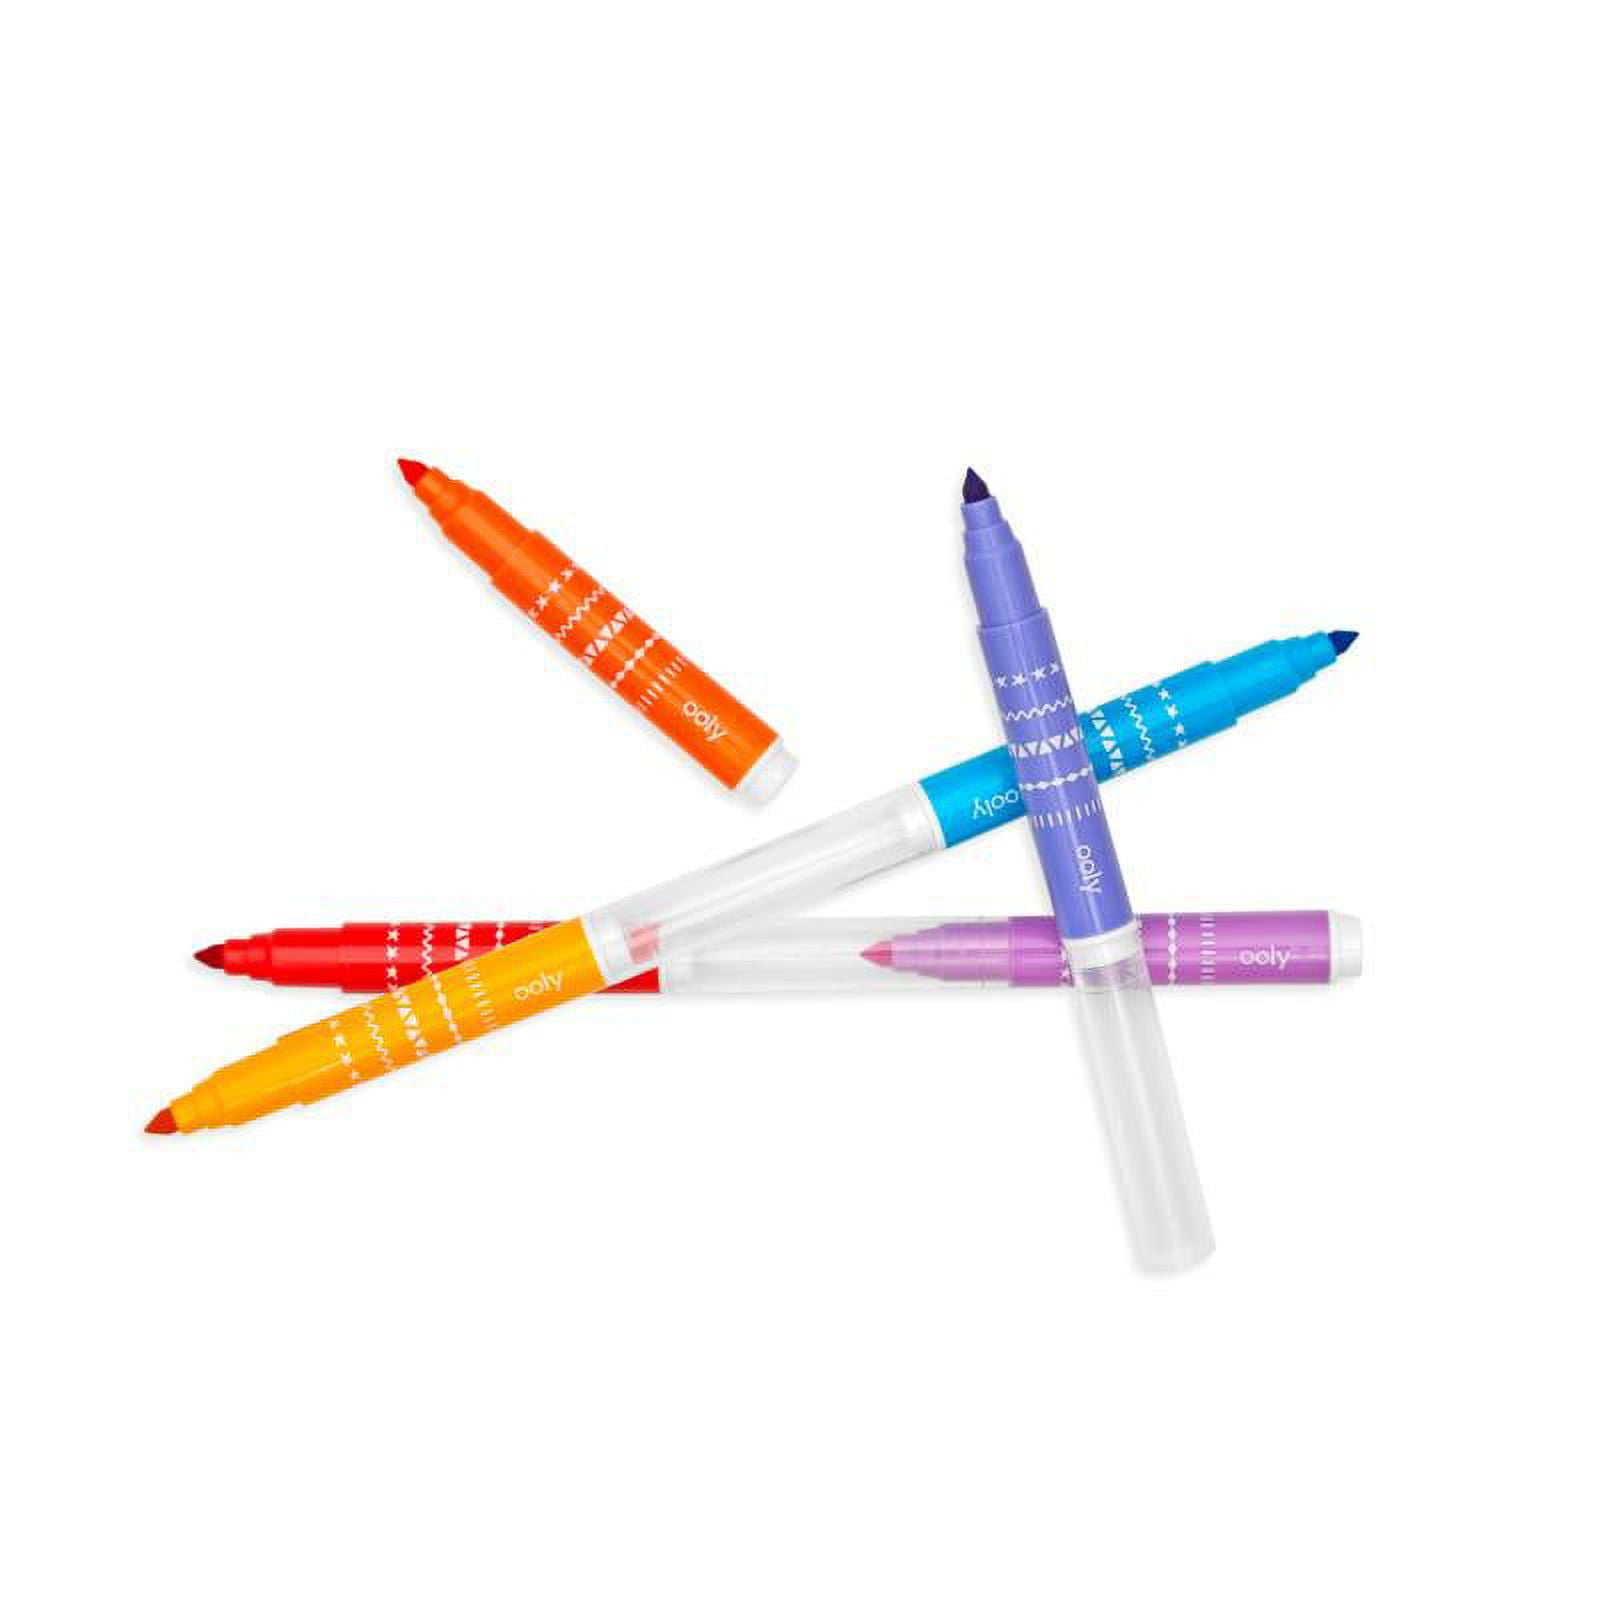 Double Up! 2-in-1 Mini Marker Travel Set - Set of 36 - Imagine That Toys